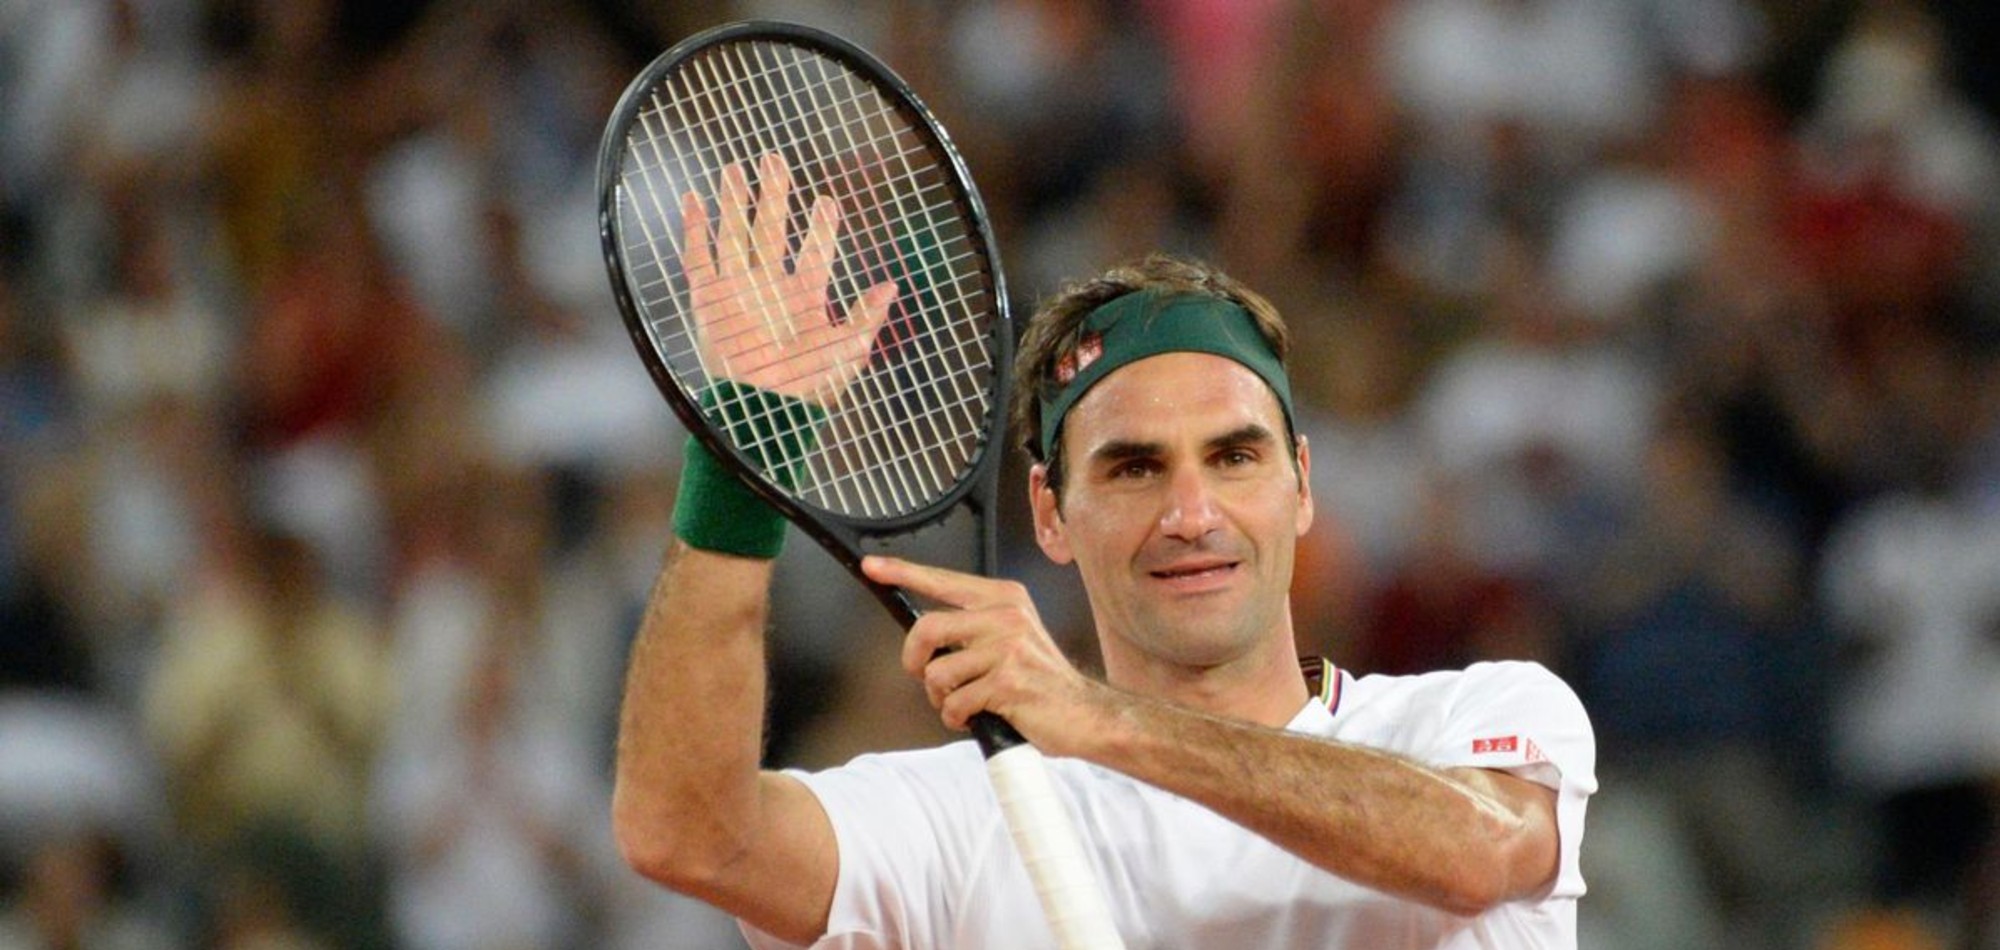 Roger Federer aiming to return to tennis in Doha in March